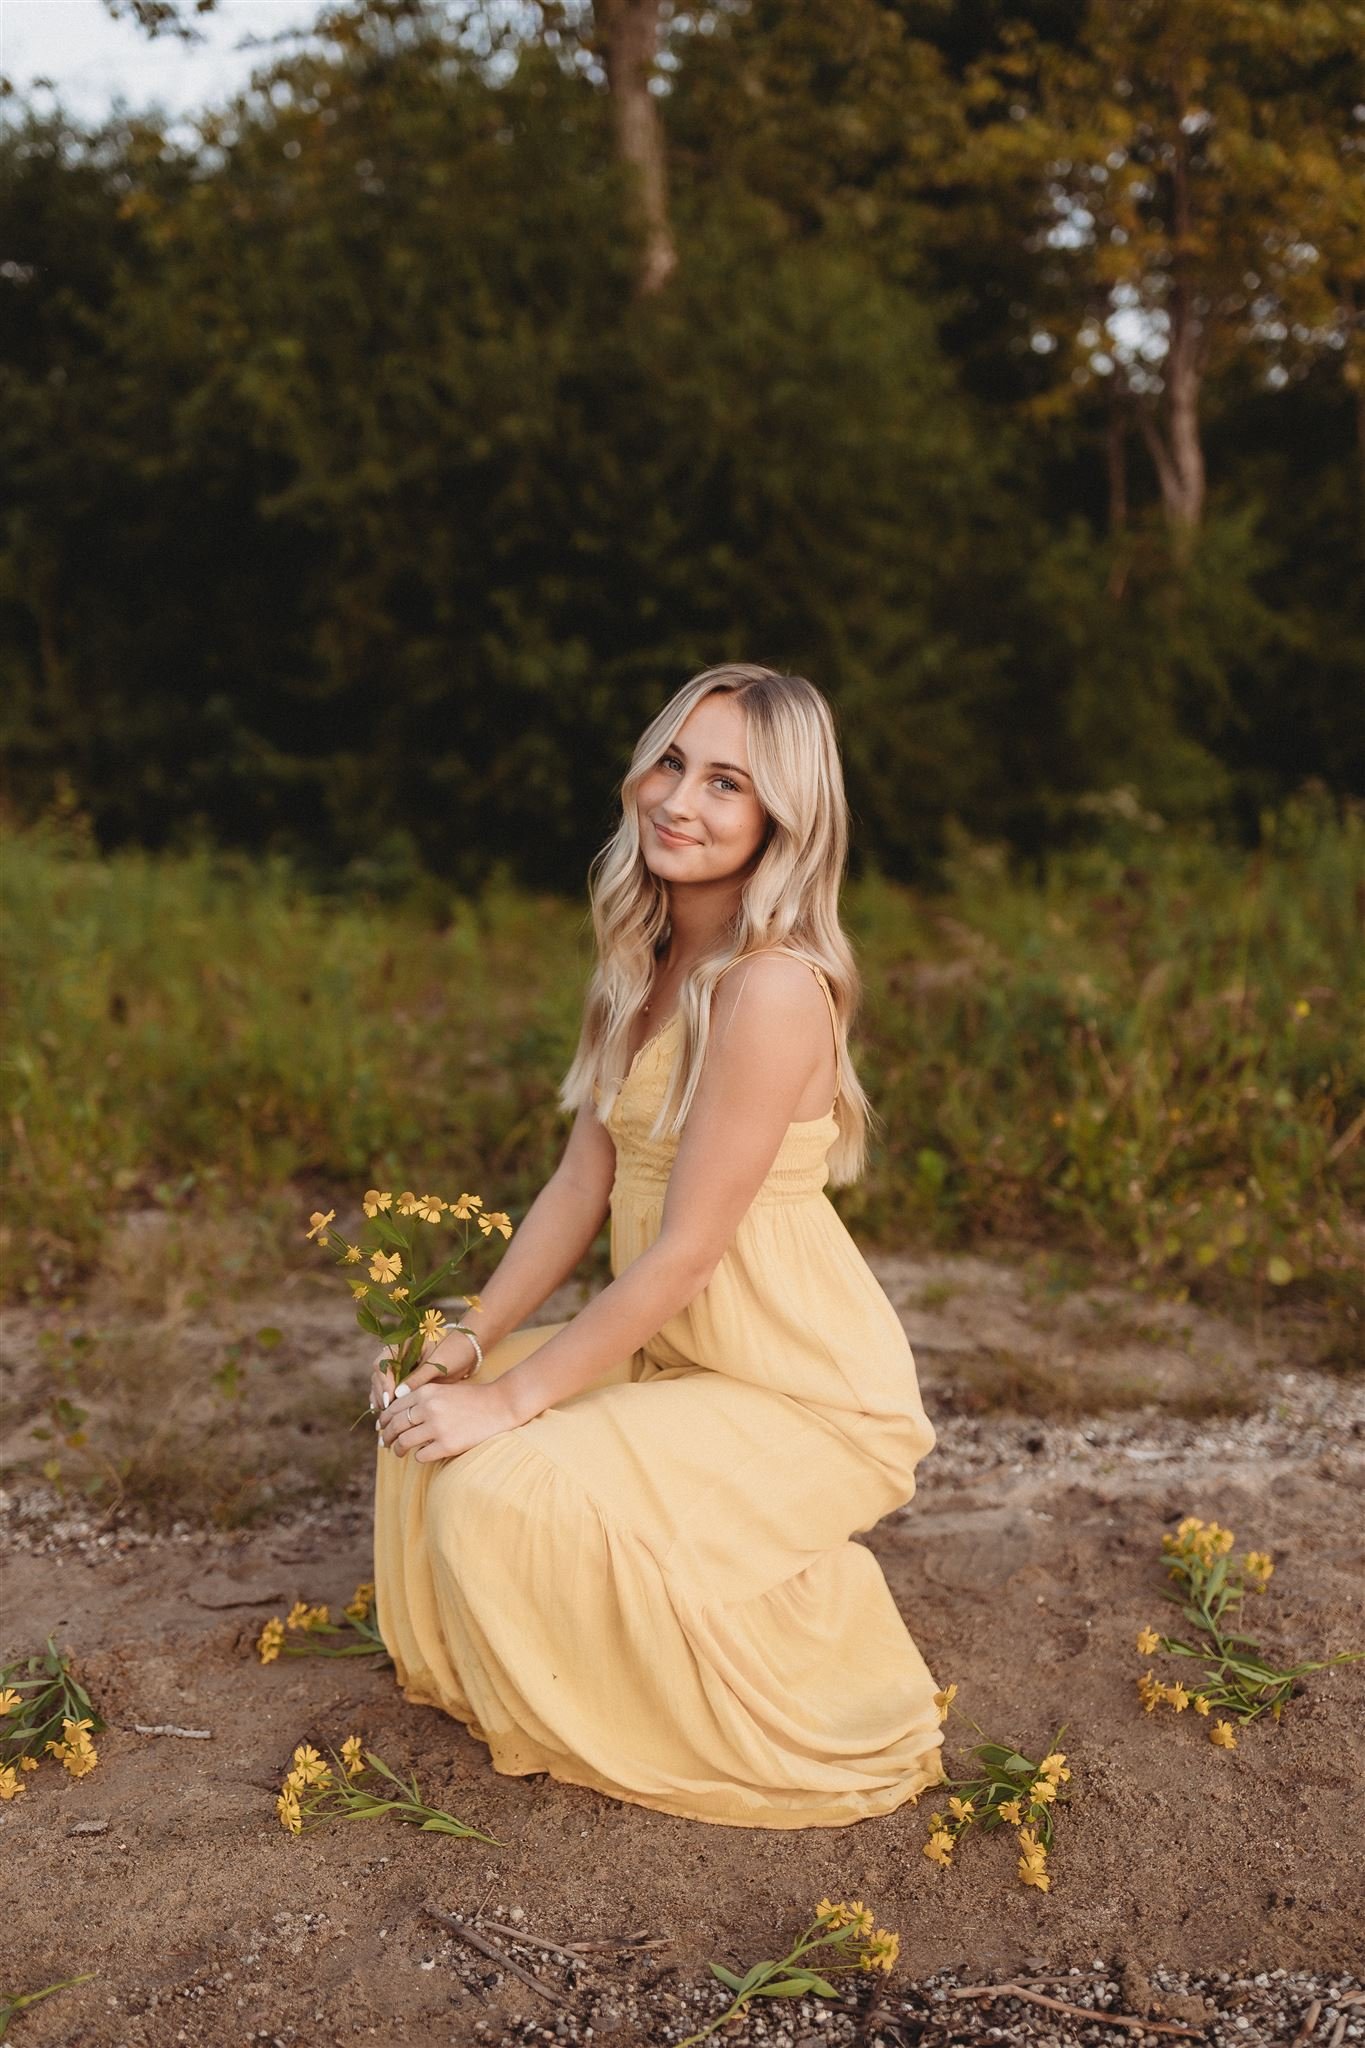  a young woman crouches down in a sandy/grassy area while wearing a long yellow dress 